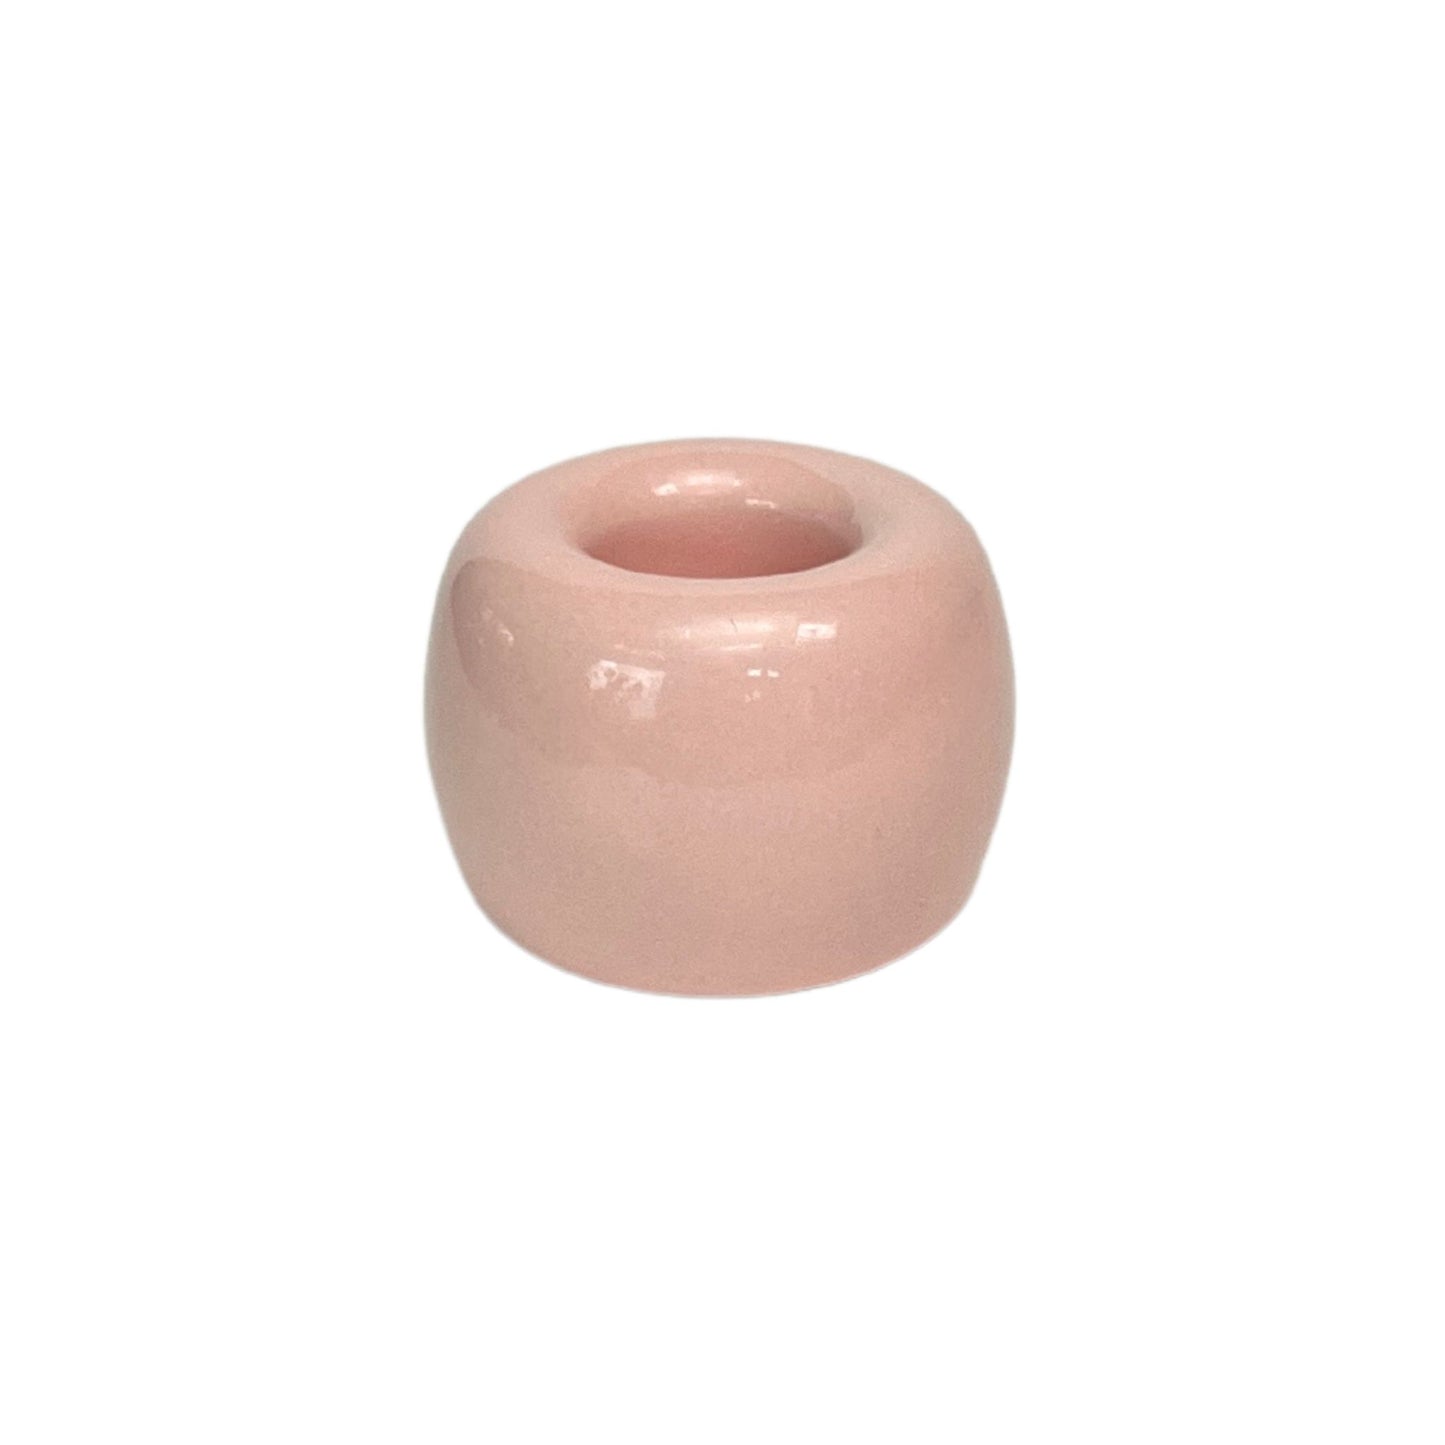 small ceramic toothbrush holder in glossy pink finish